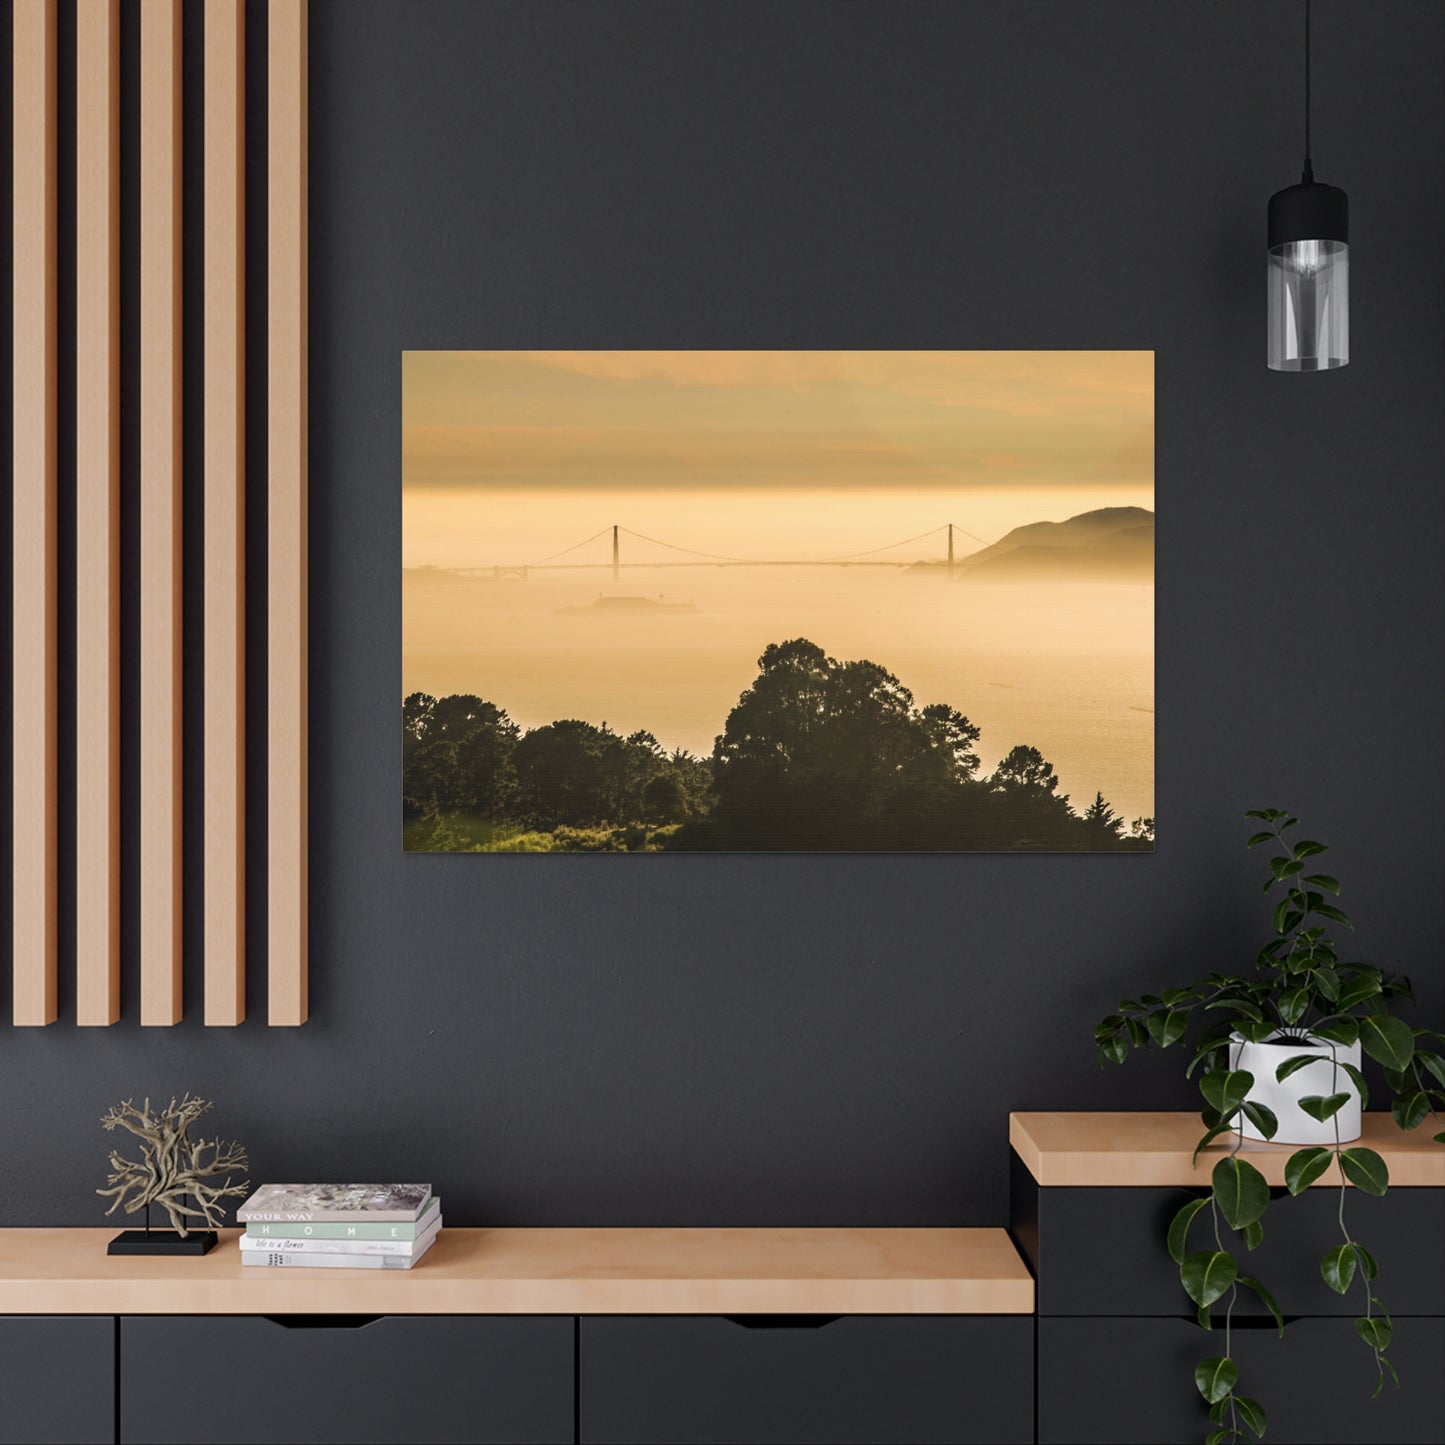 Canvas Print Of The Golden Gate Bridge And Trees In San Francisco In Fog For Wall Art